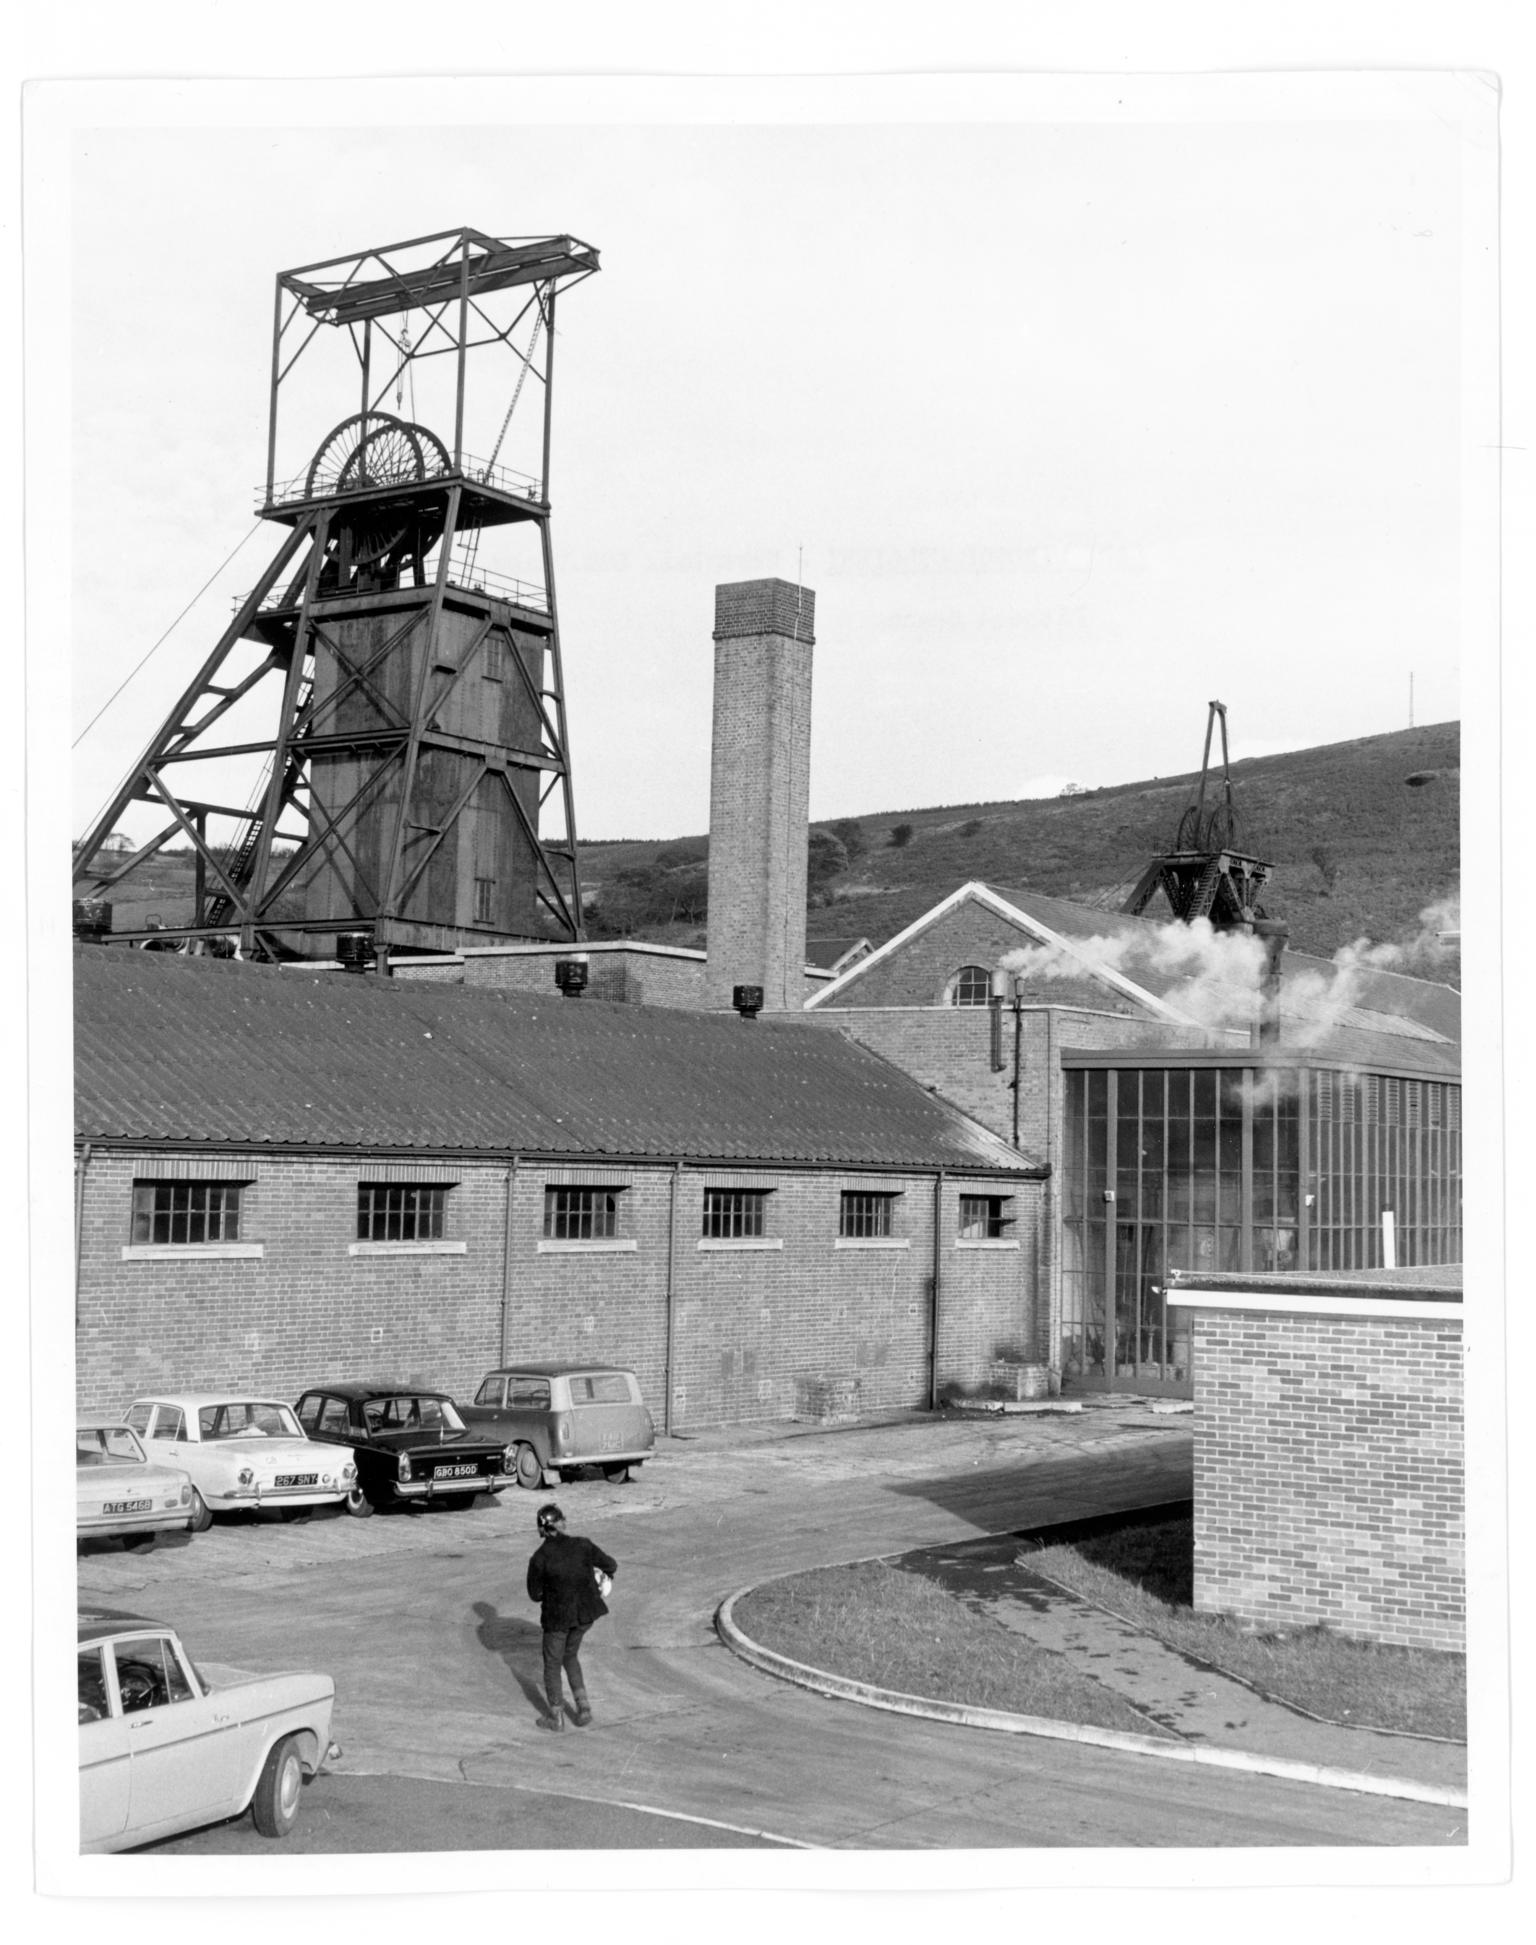 Lady Windsor Colliery, photograph